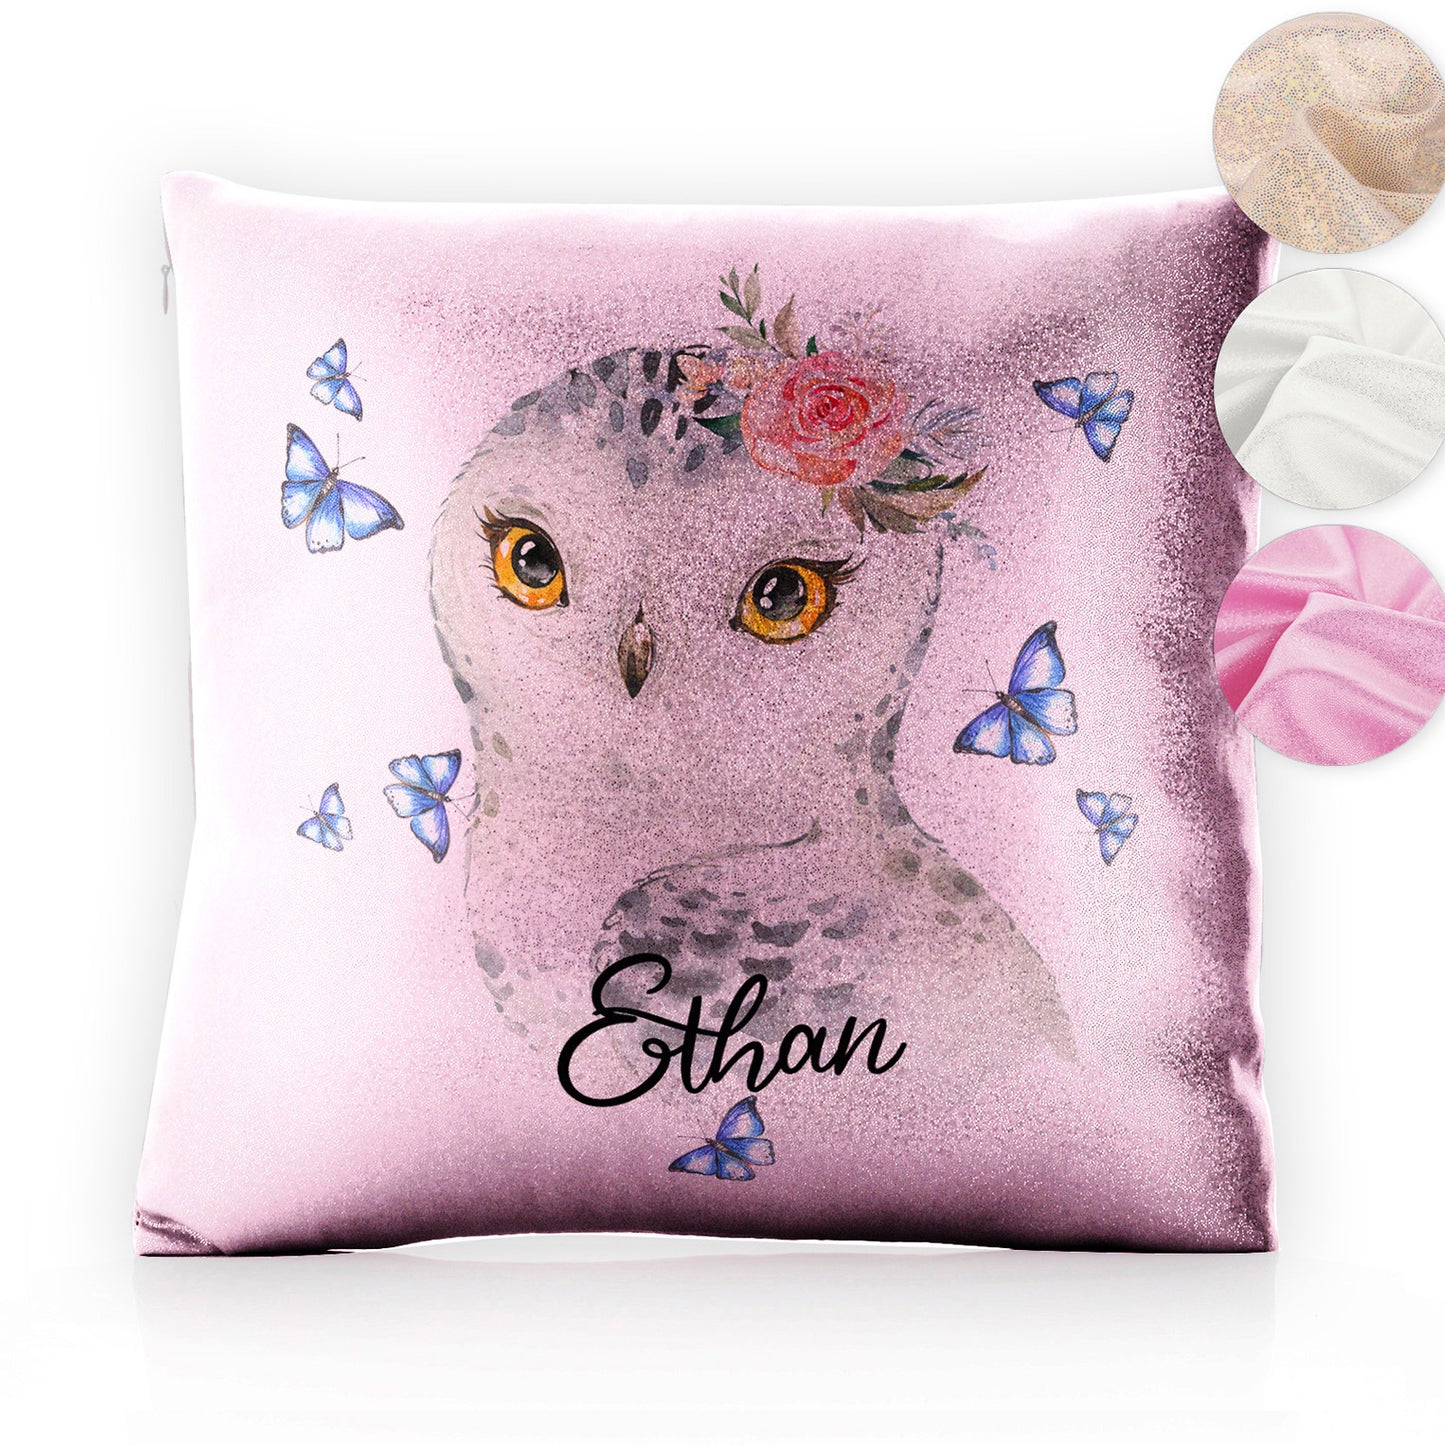 Personalised Glitter Cushion with Snow Owl Blue Butterfly and Cute Text